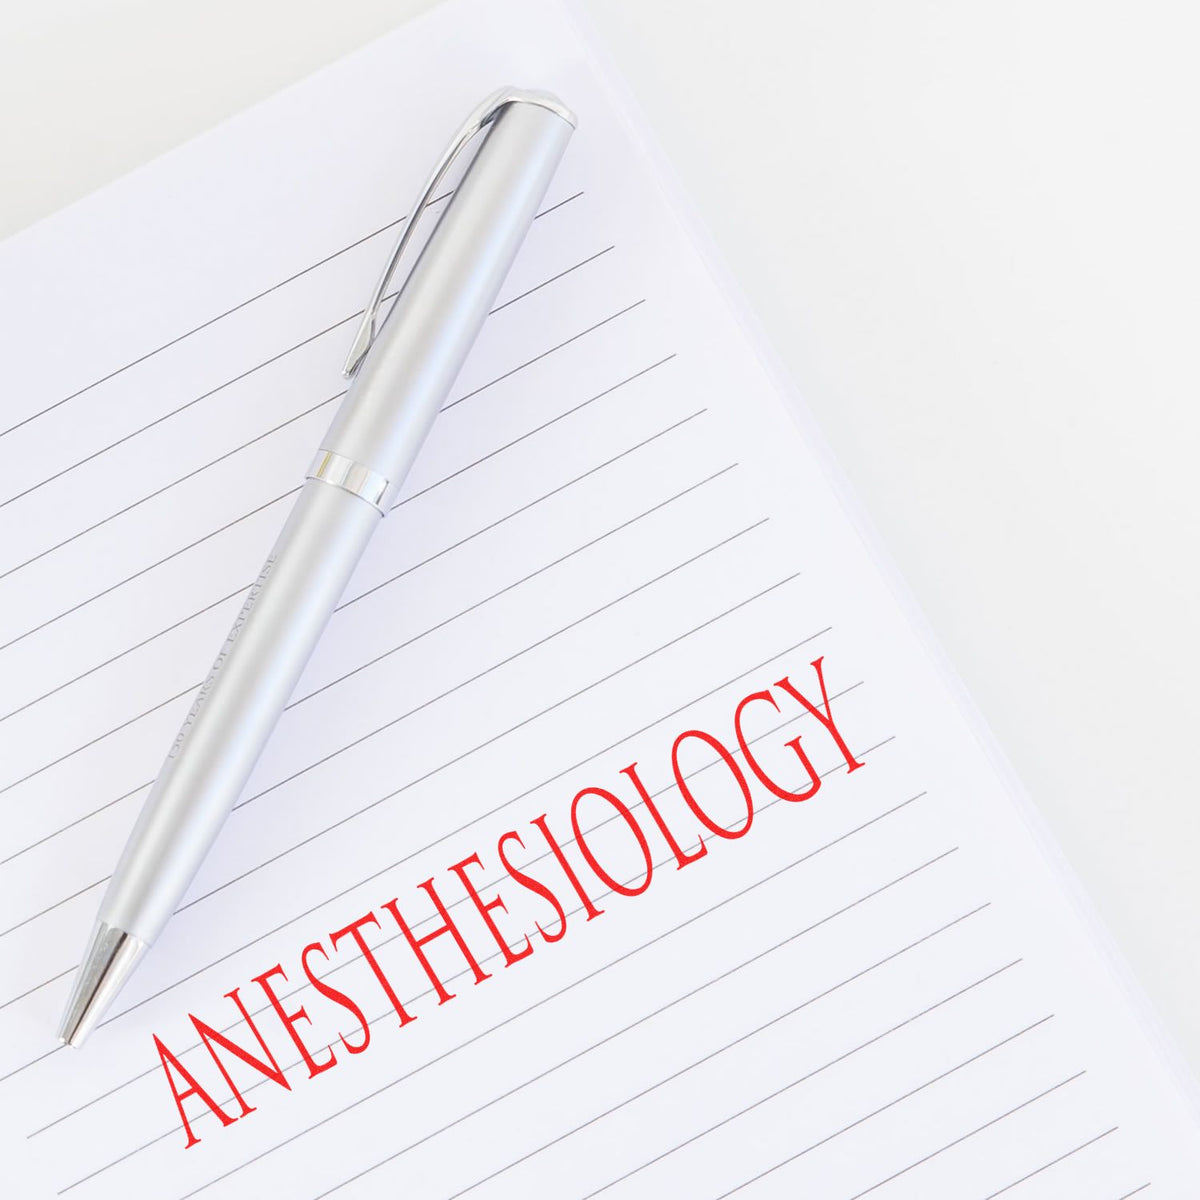 Large Anesthesiology Rubber Stamp In Use Photo